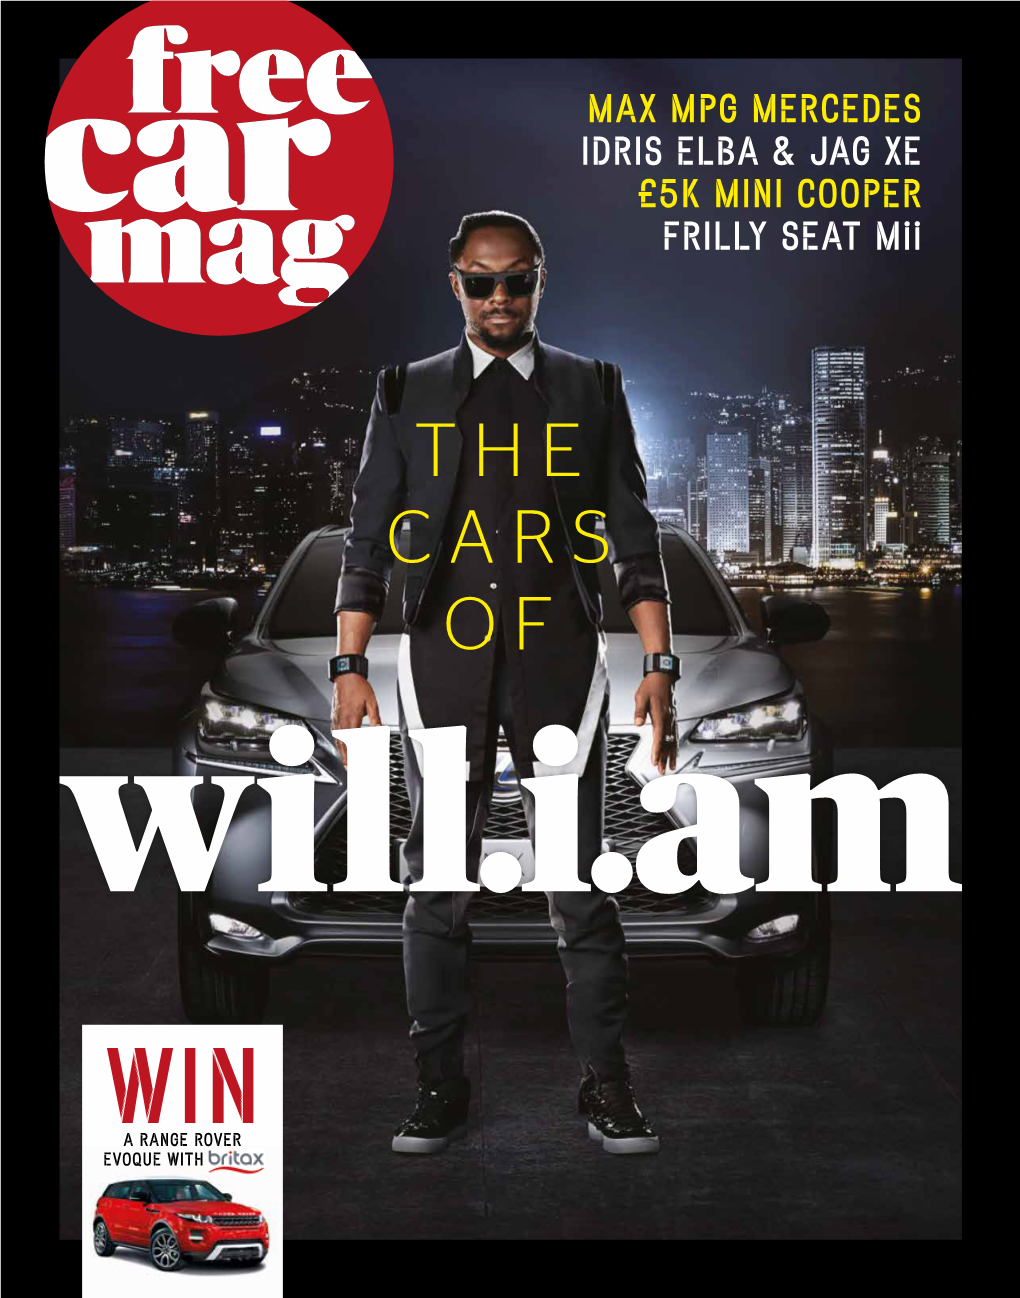 THE CARS of Will.I.Am WIN a RANGE ROVER EVOQUE with BRITAX